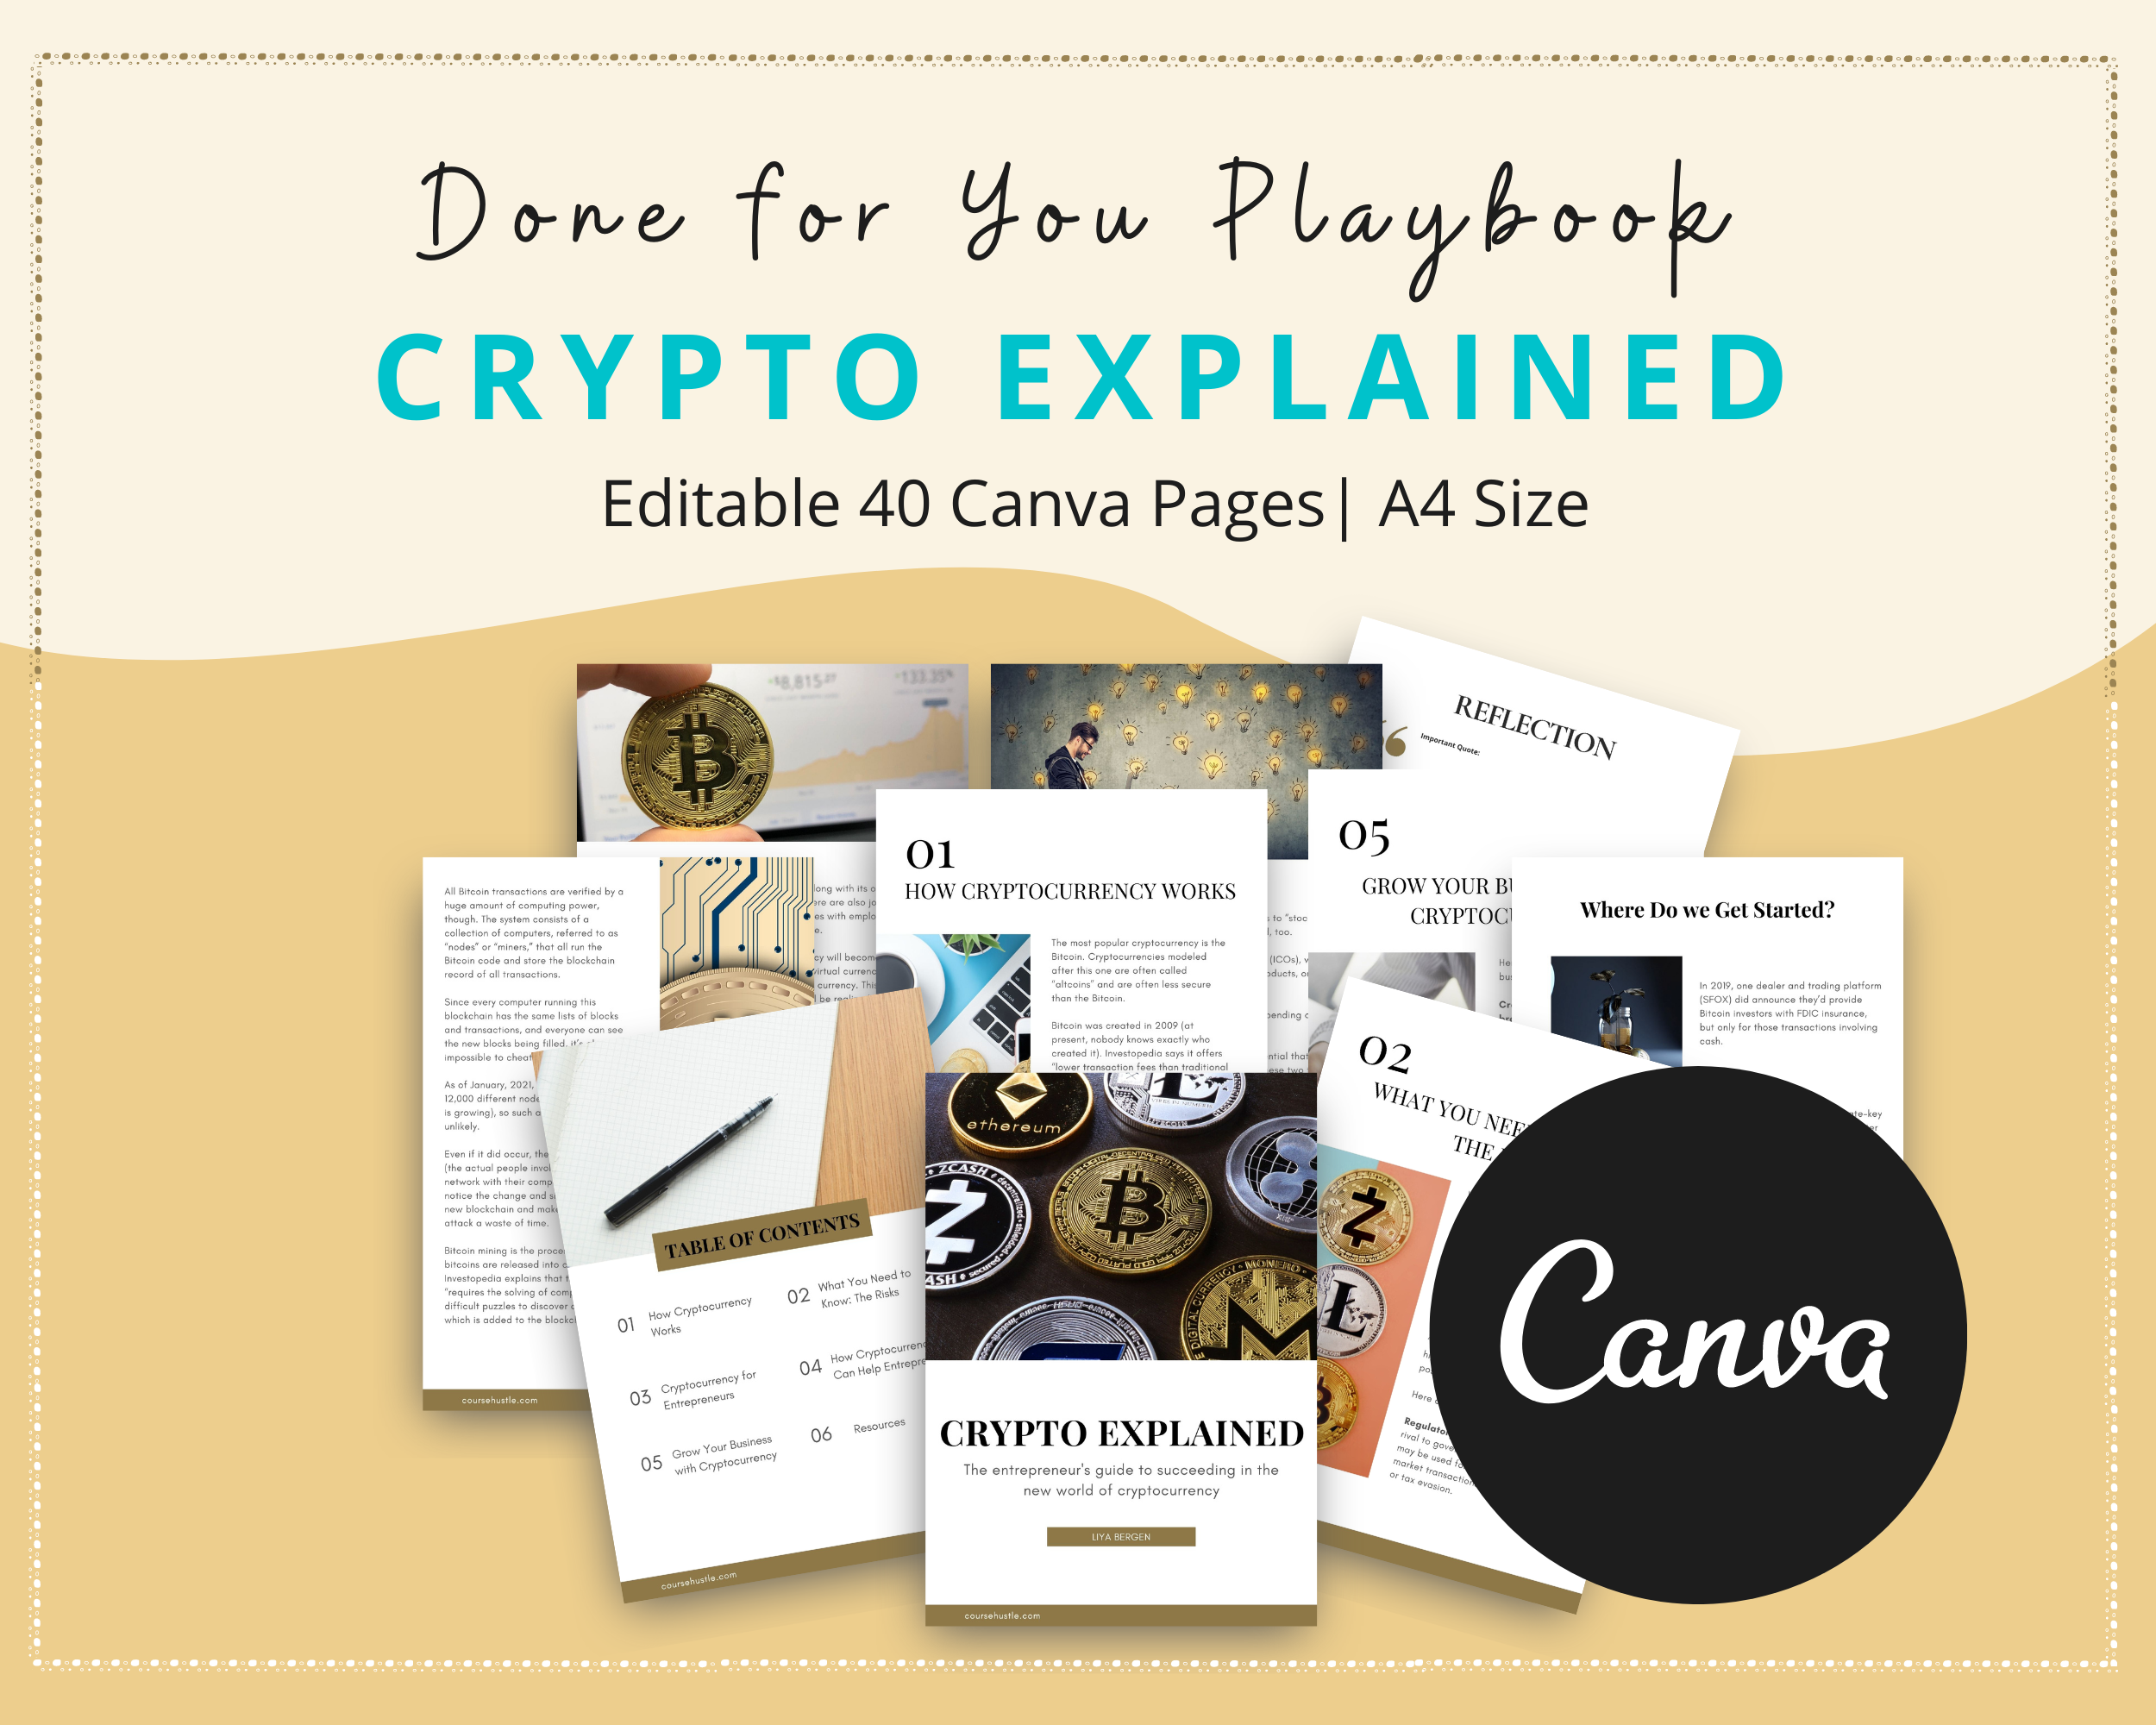 Done for You Crypto Explained Playbook in Canva | Editable A4 Size Canva Template